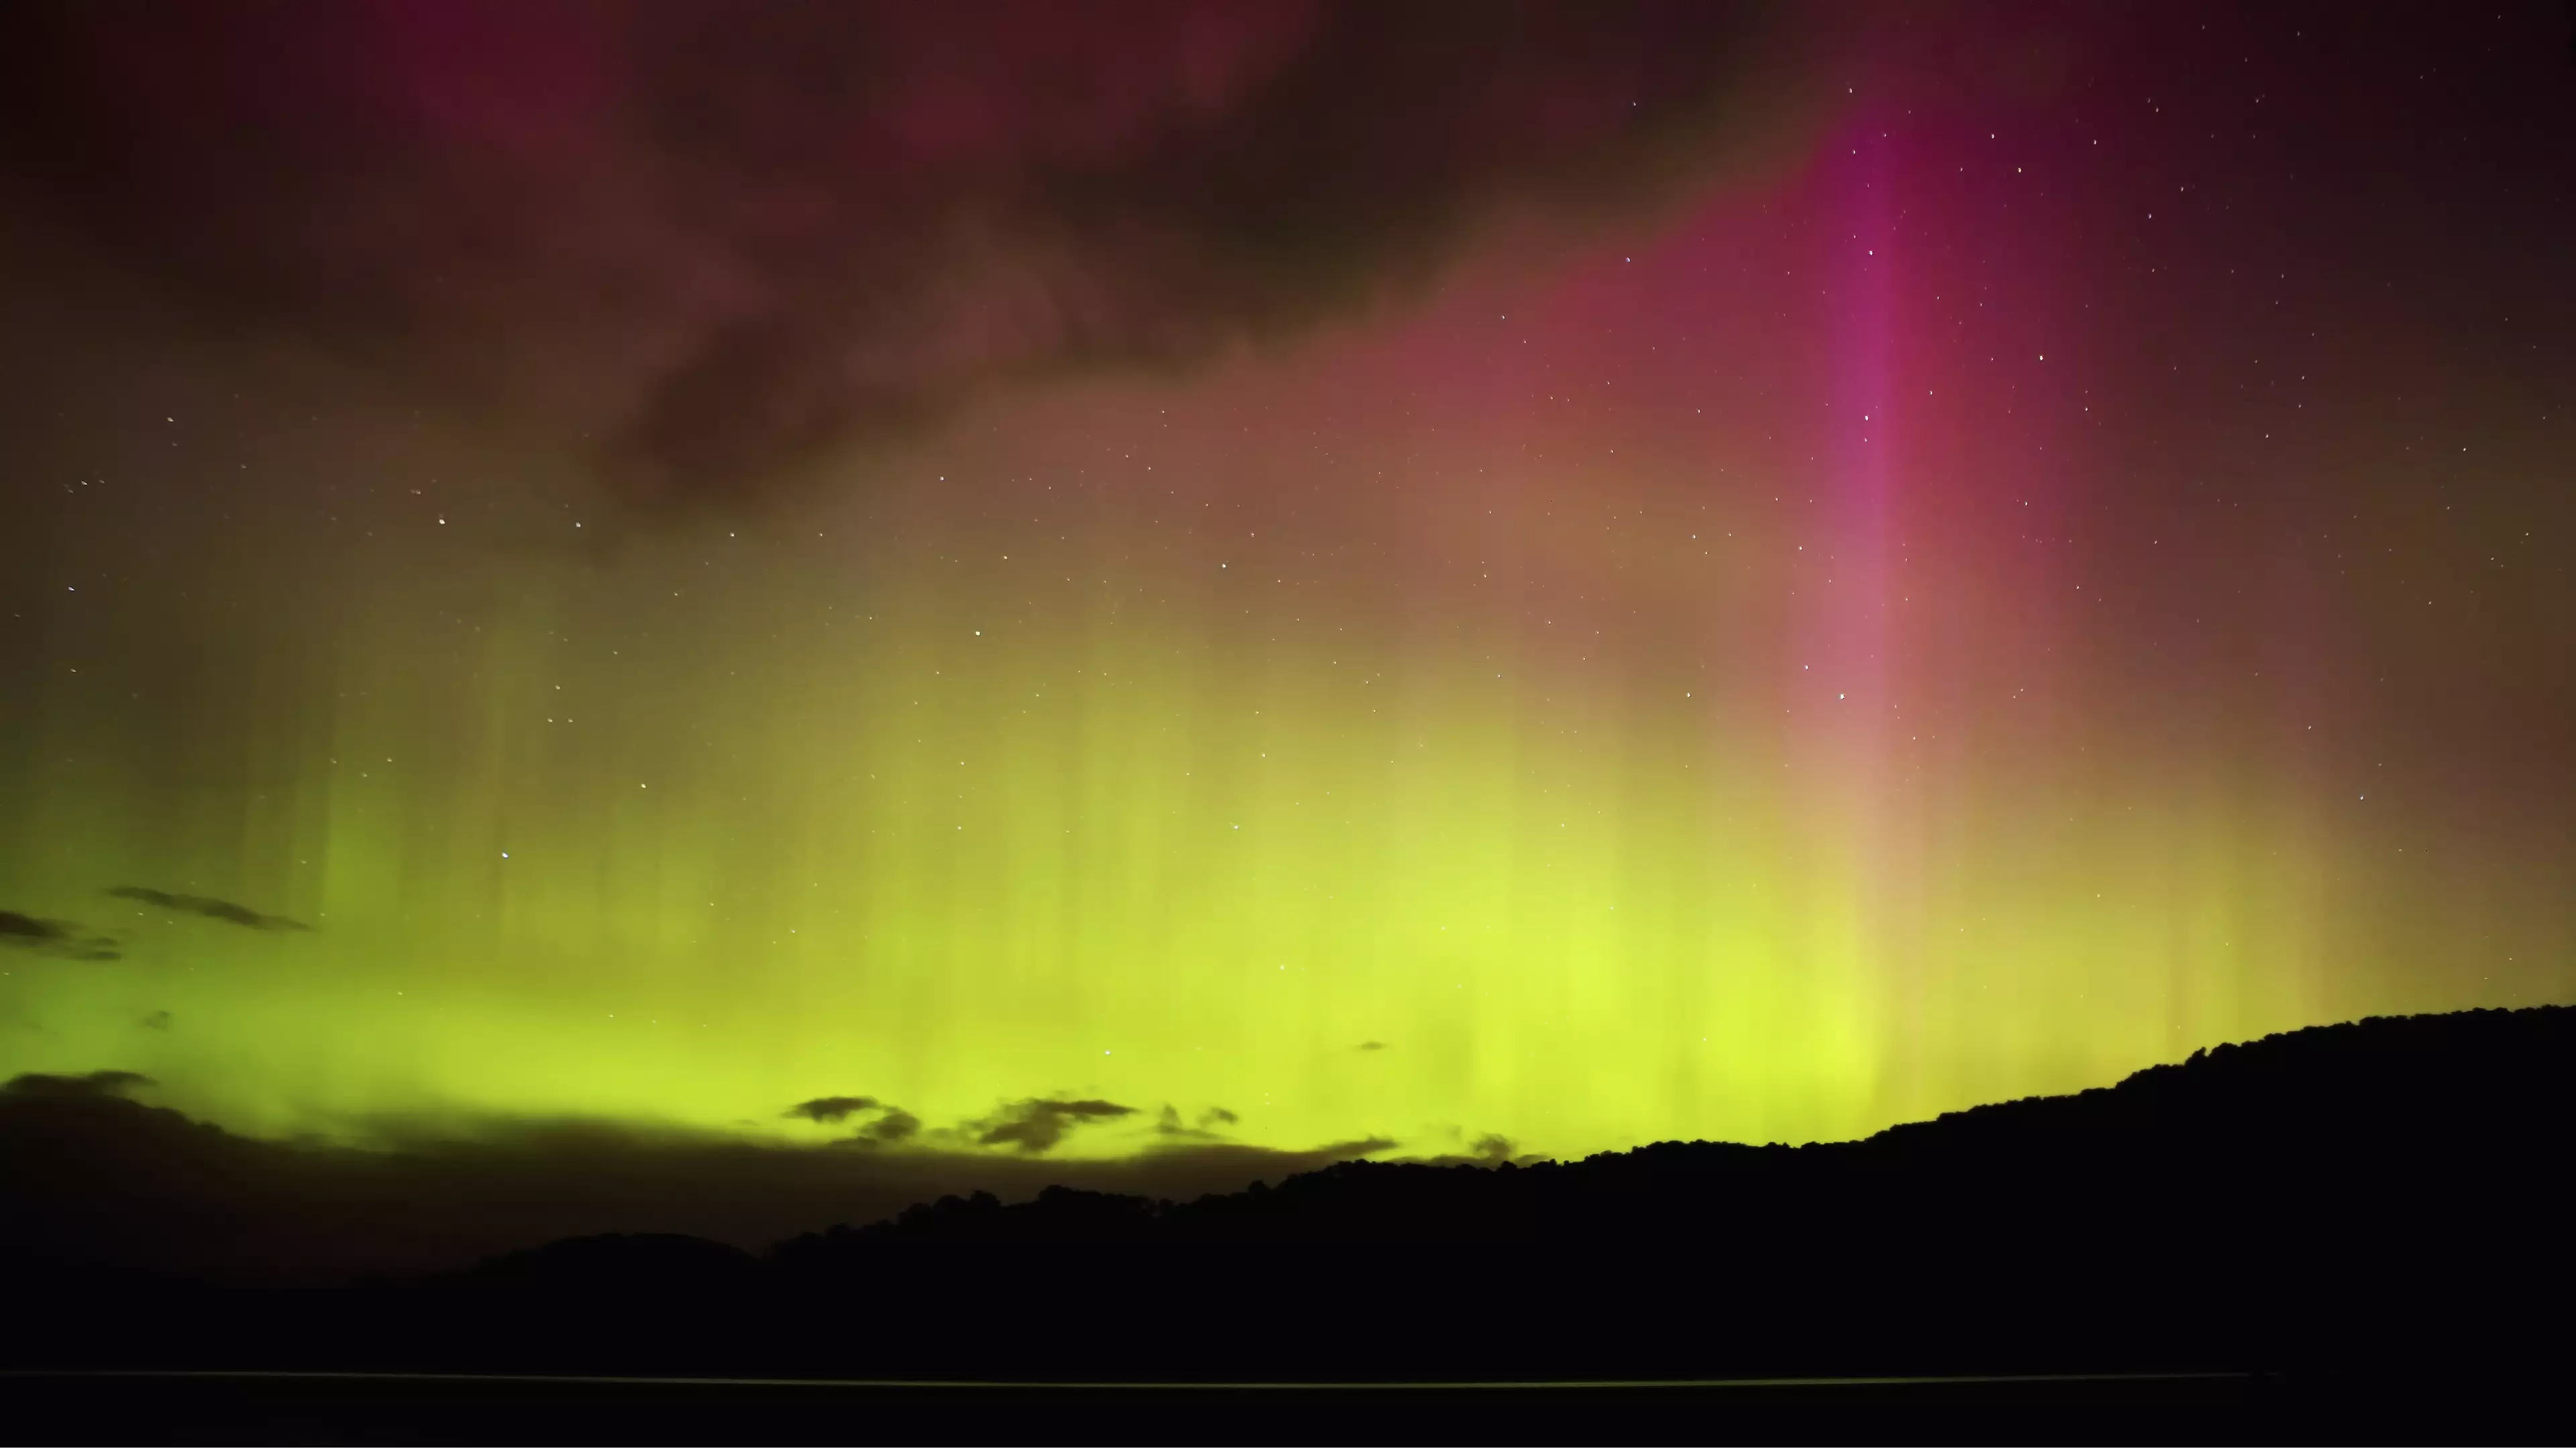 Australians Could Catch A Glimpse Of The Southern Lights This Week